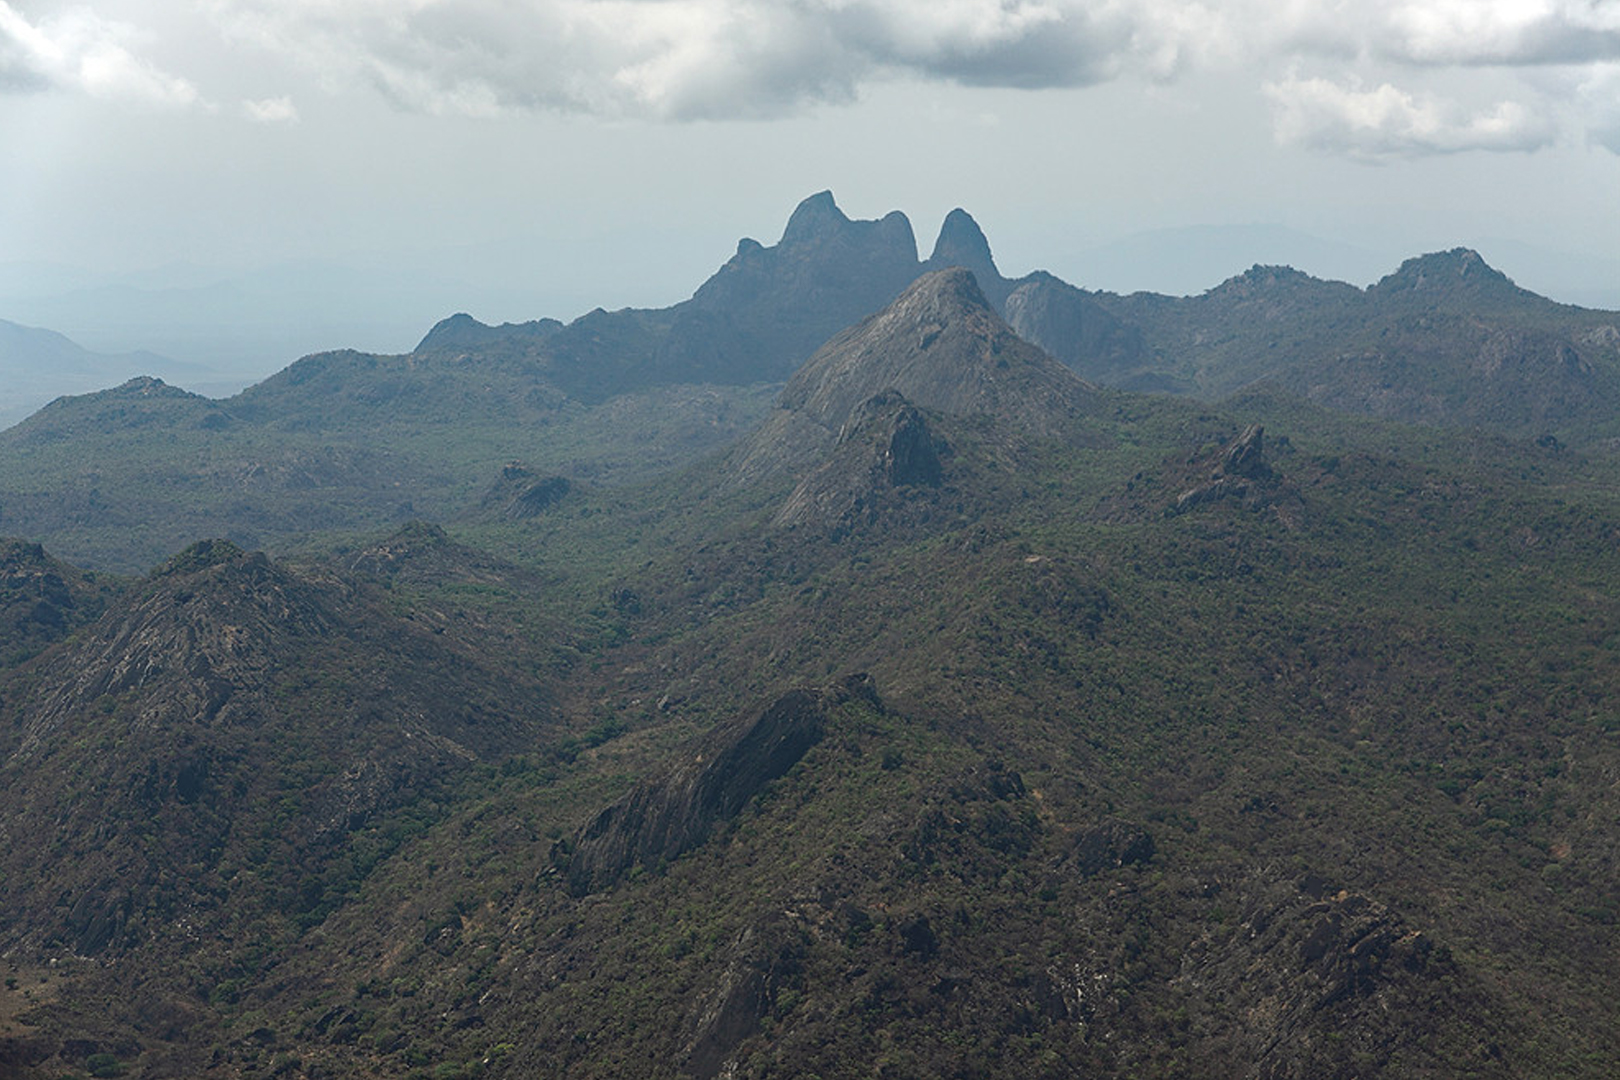 A view of the rugged mountains in Karamoja region